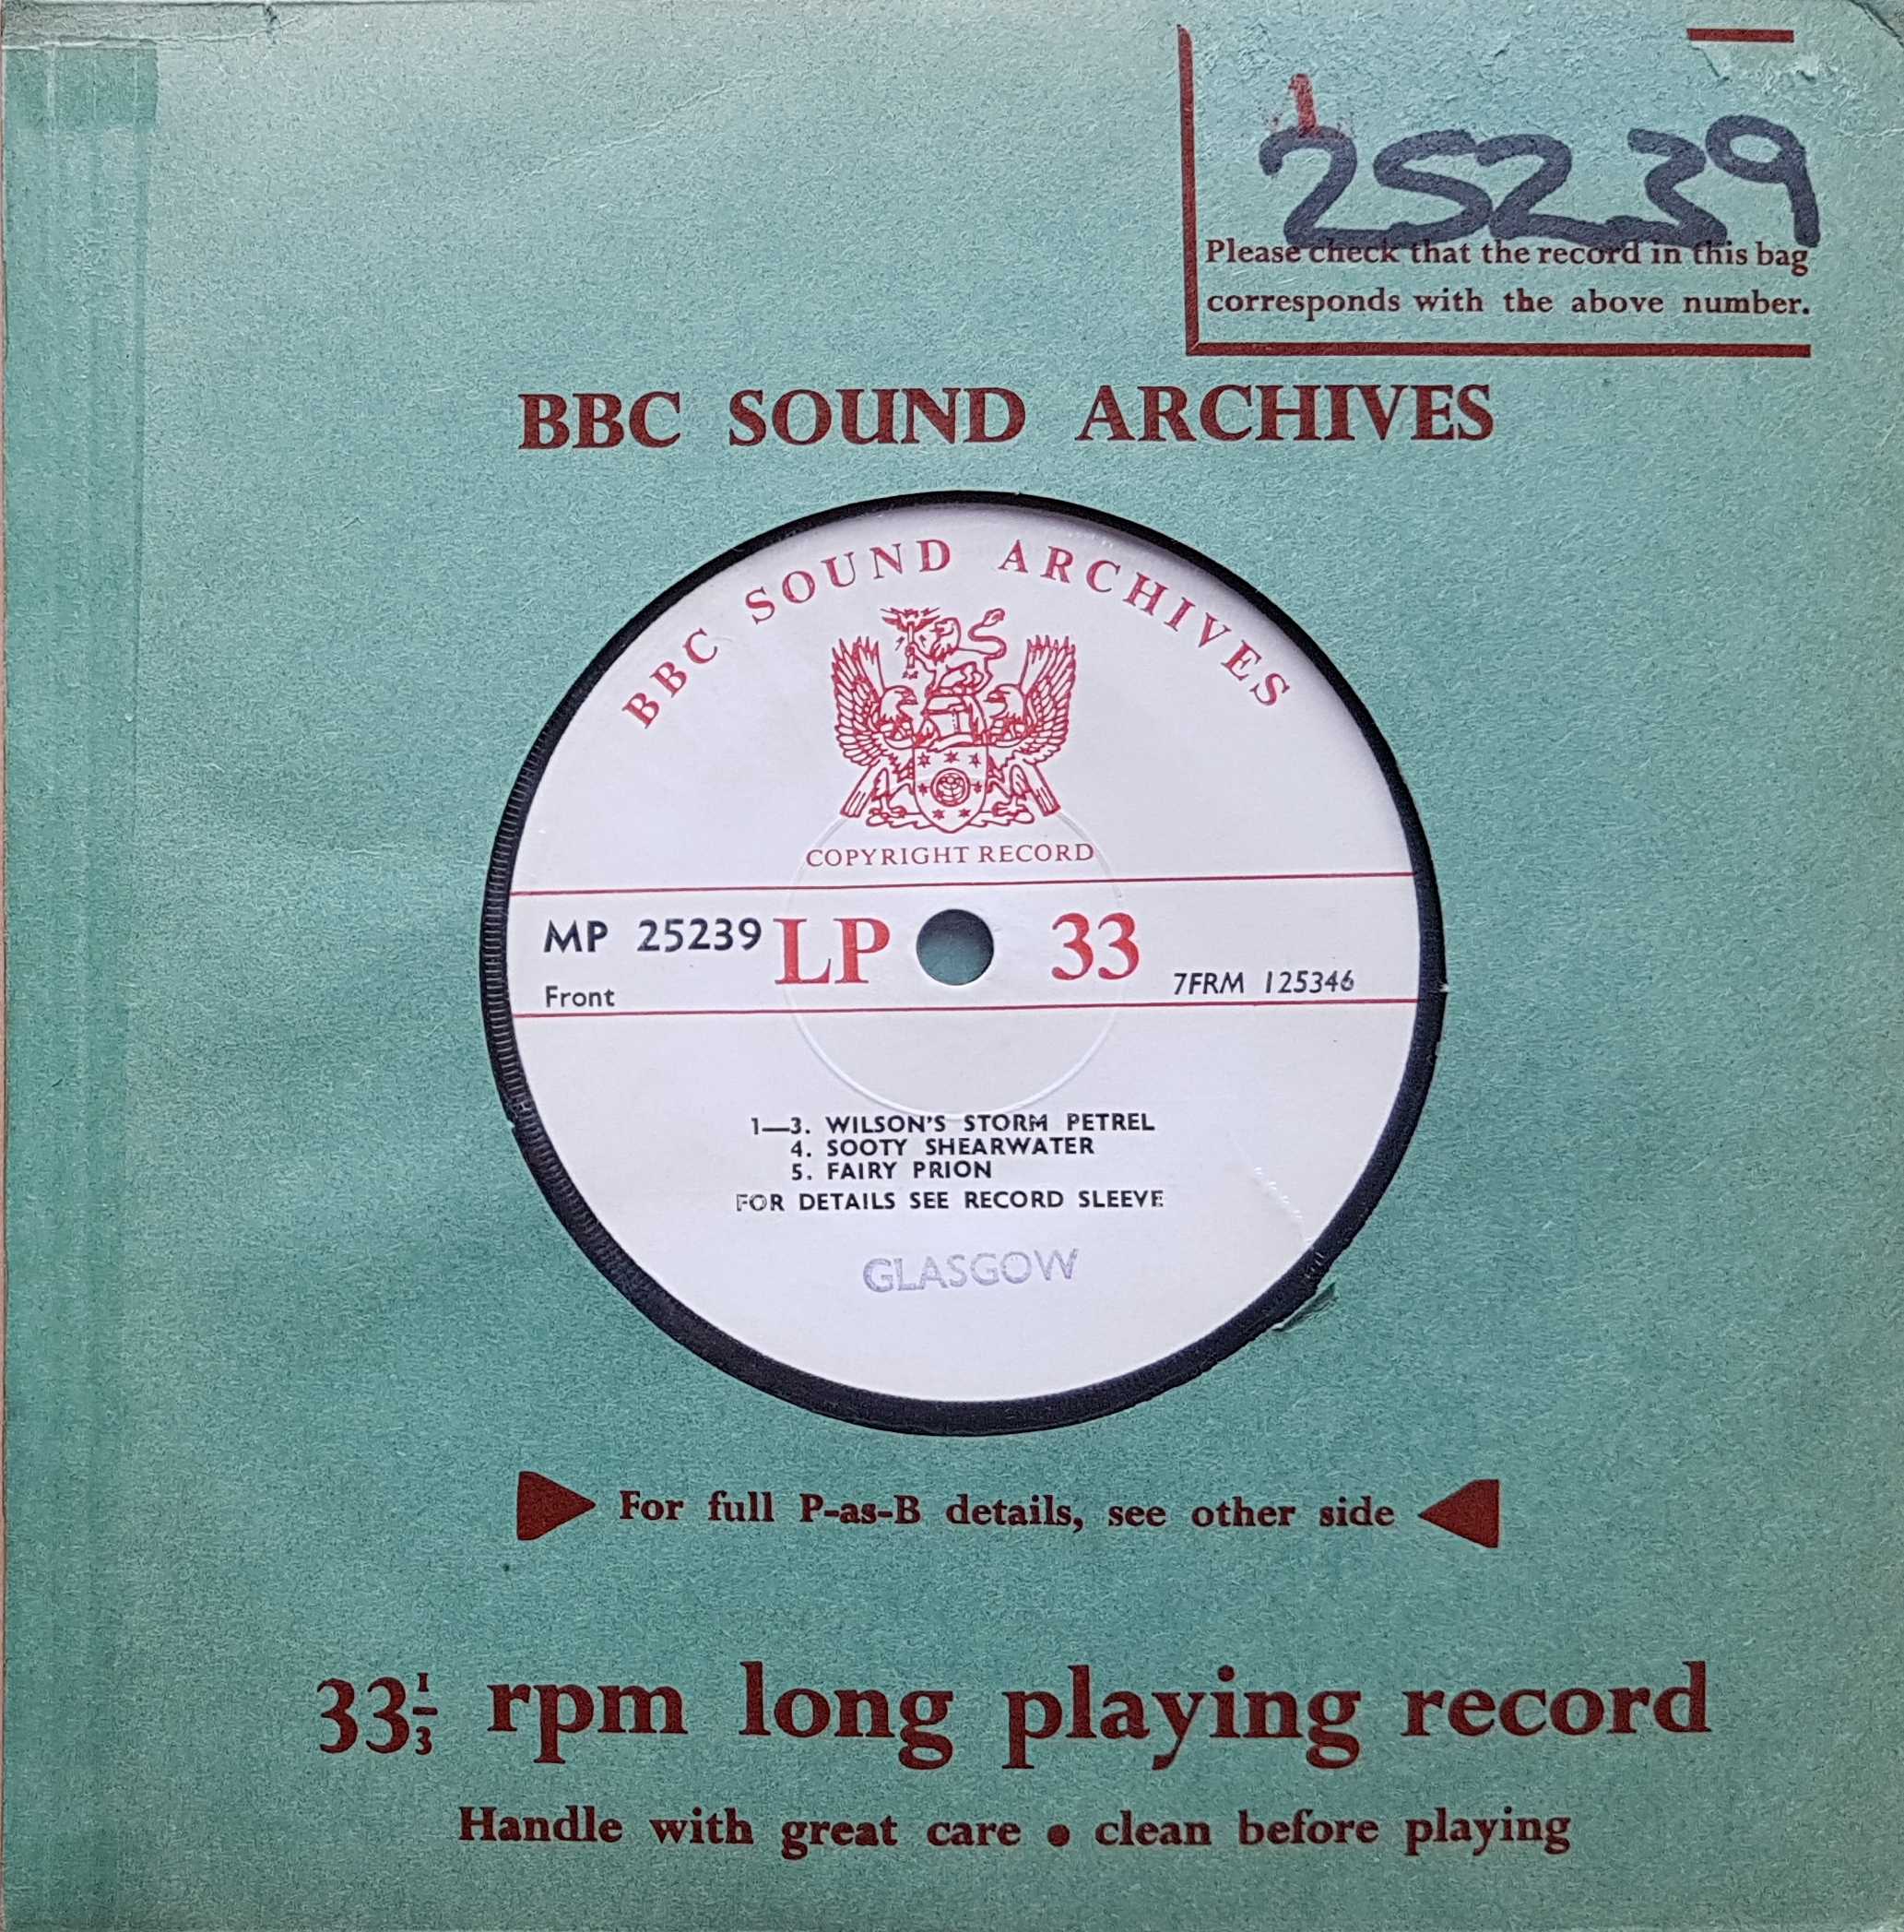 Picture of MP 25239 Animals by artist Not registered from the BBC records and Tapes library